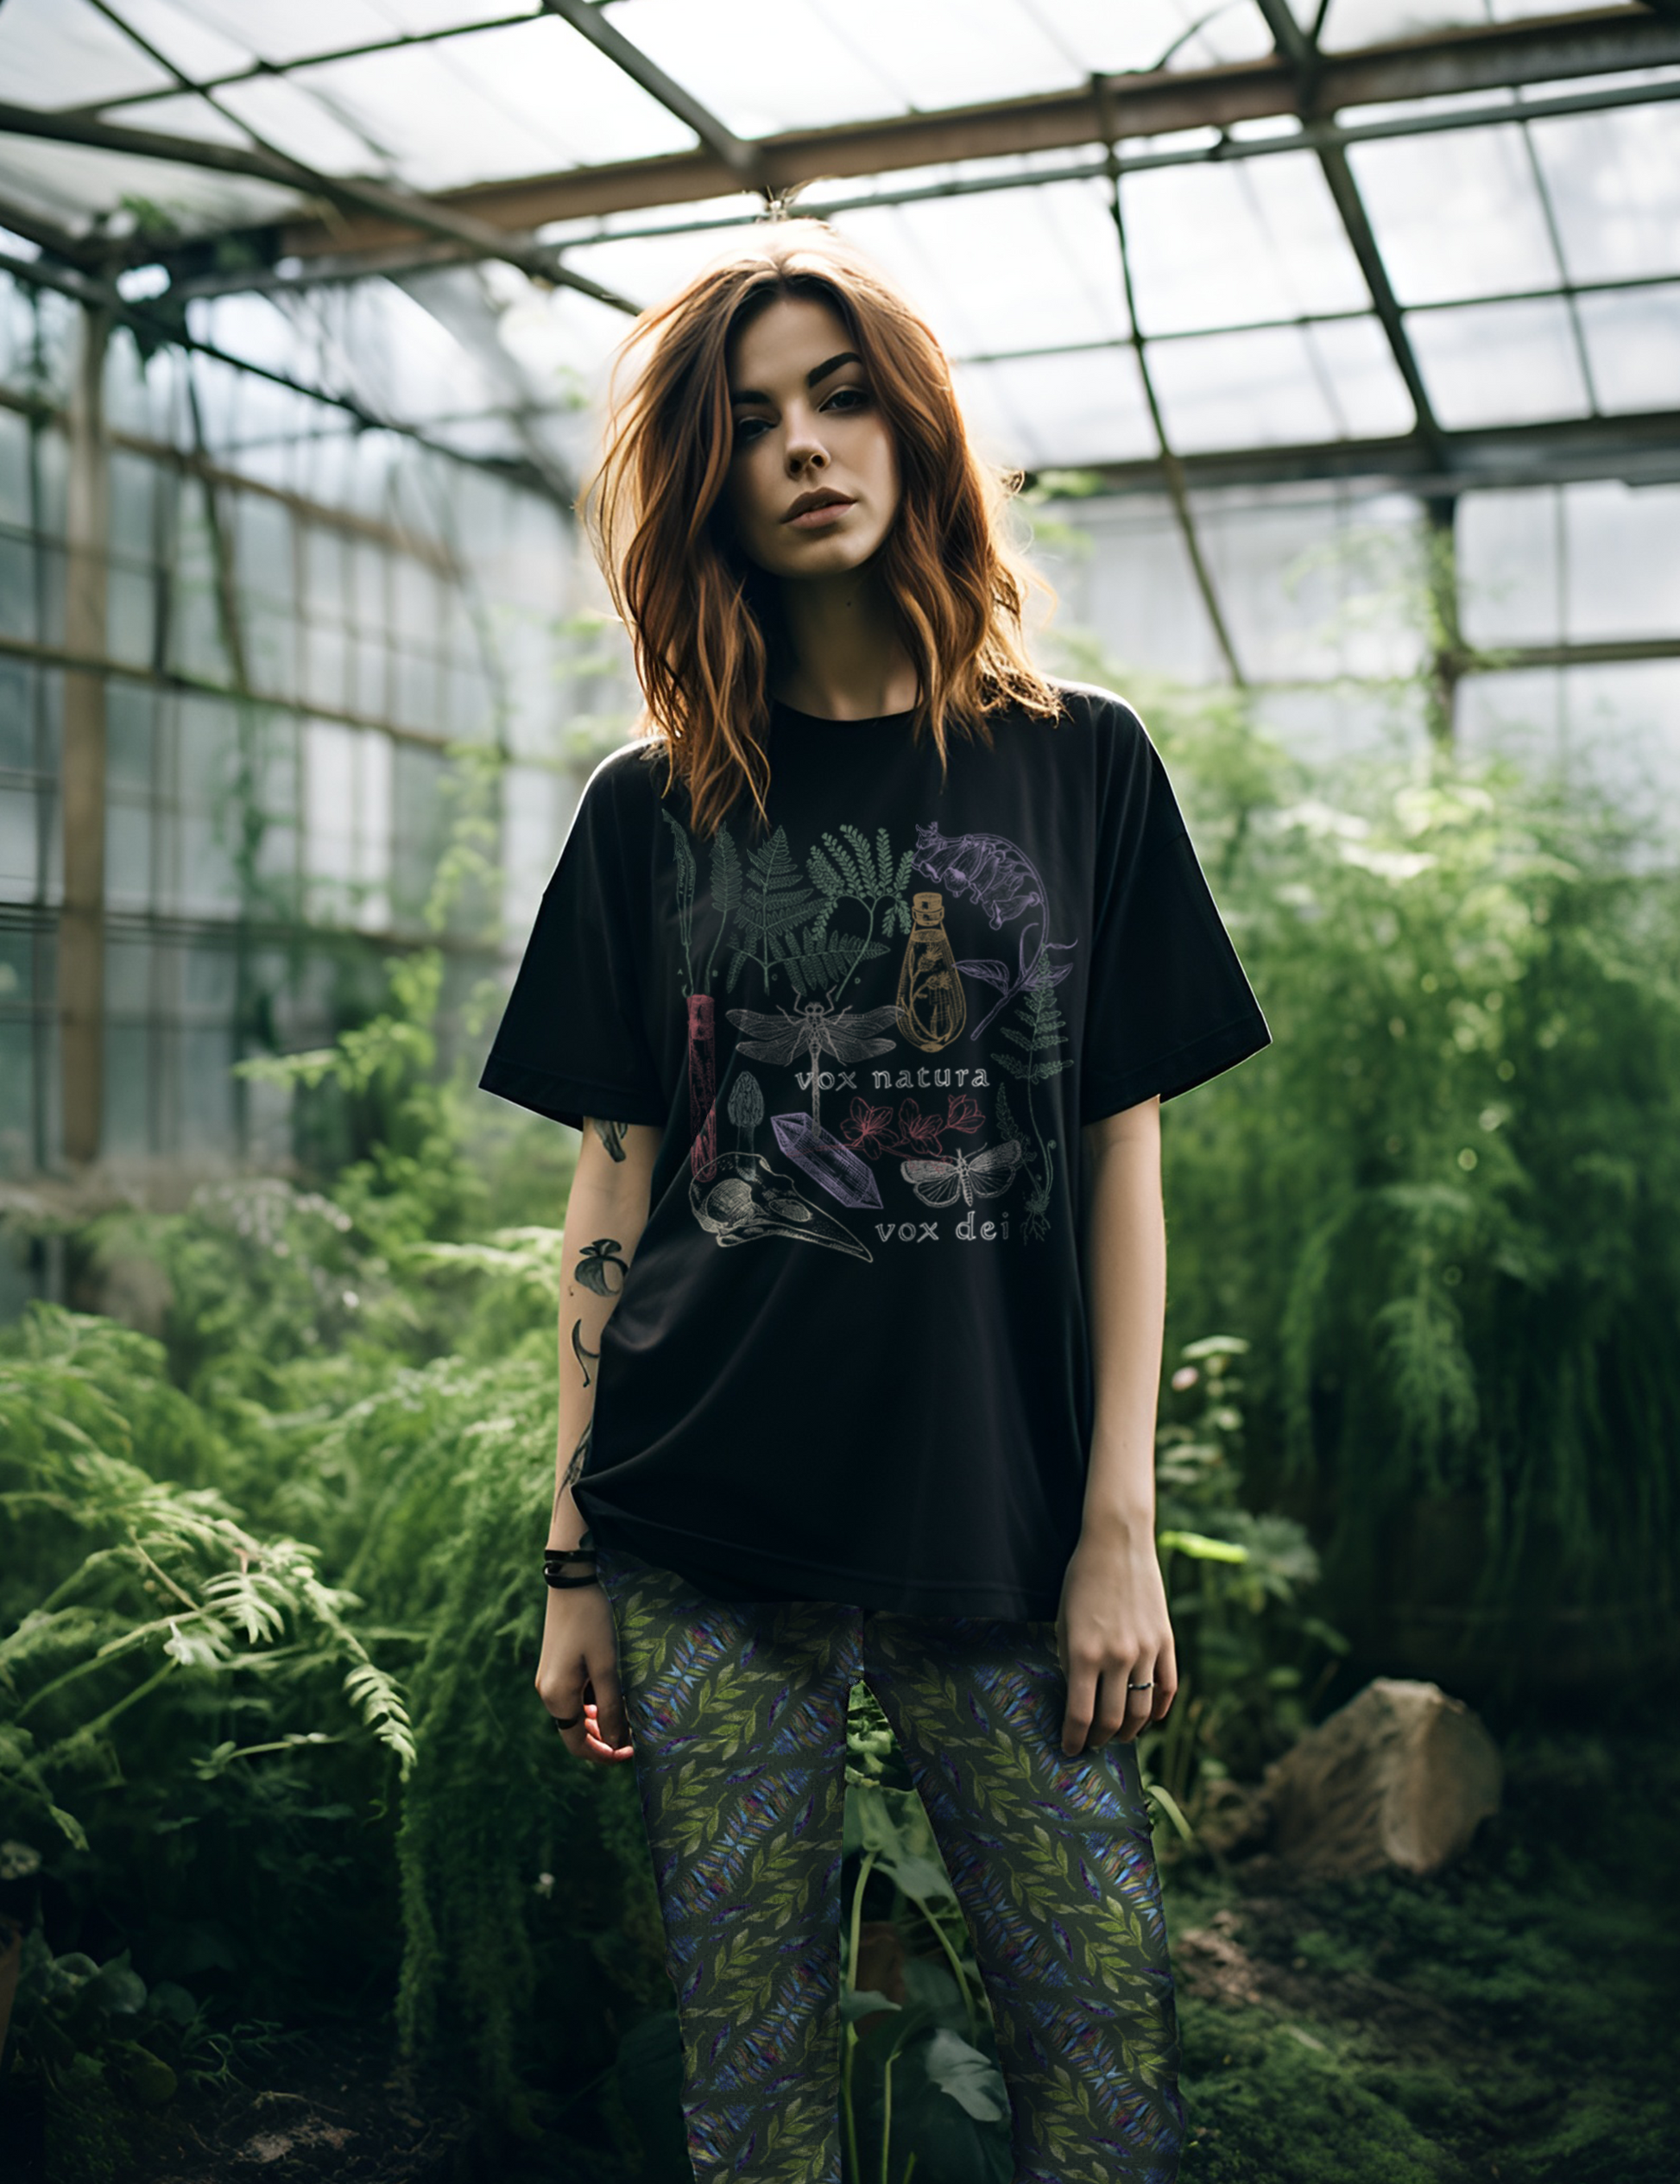 Fairy Grunge Aesthetic Outfits Greenery Leggings